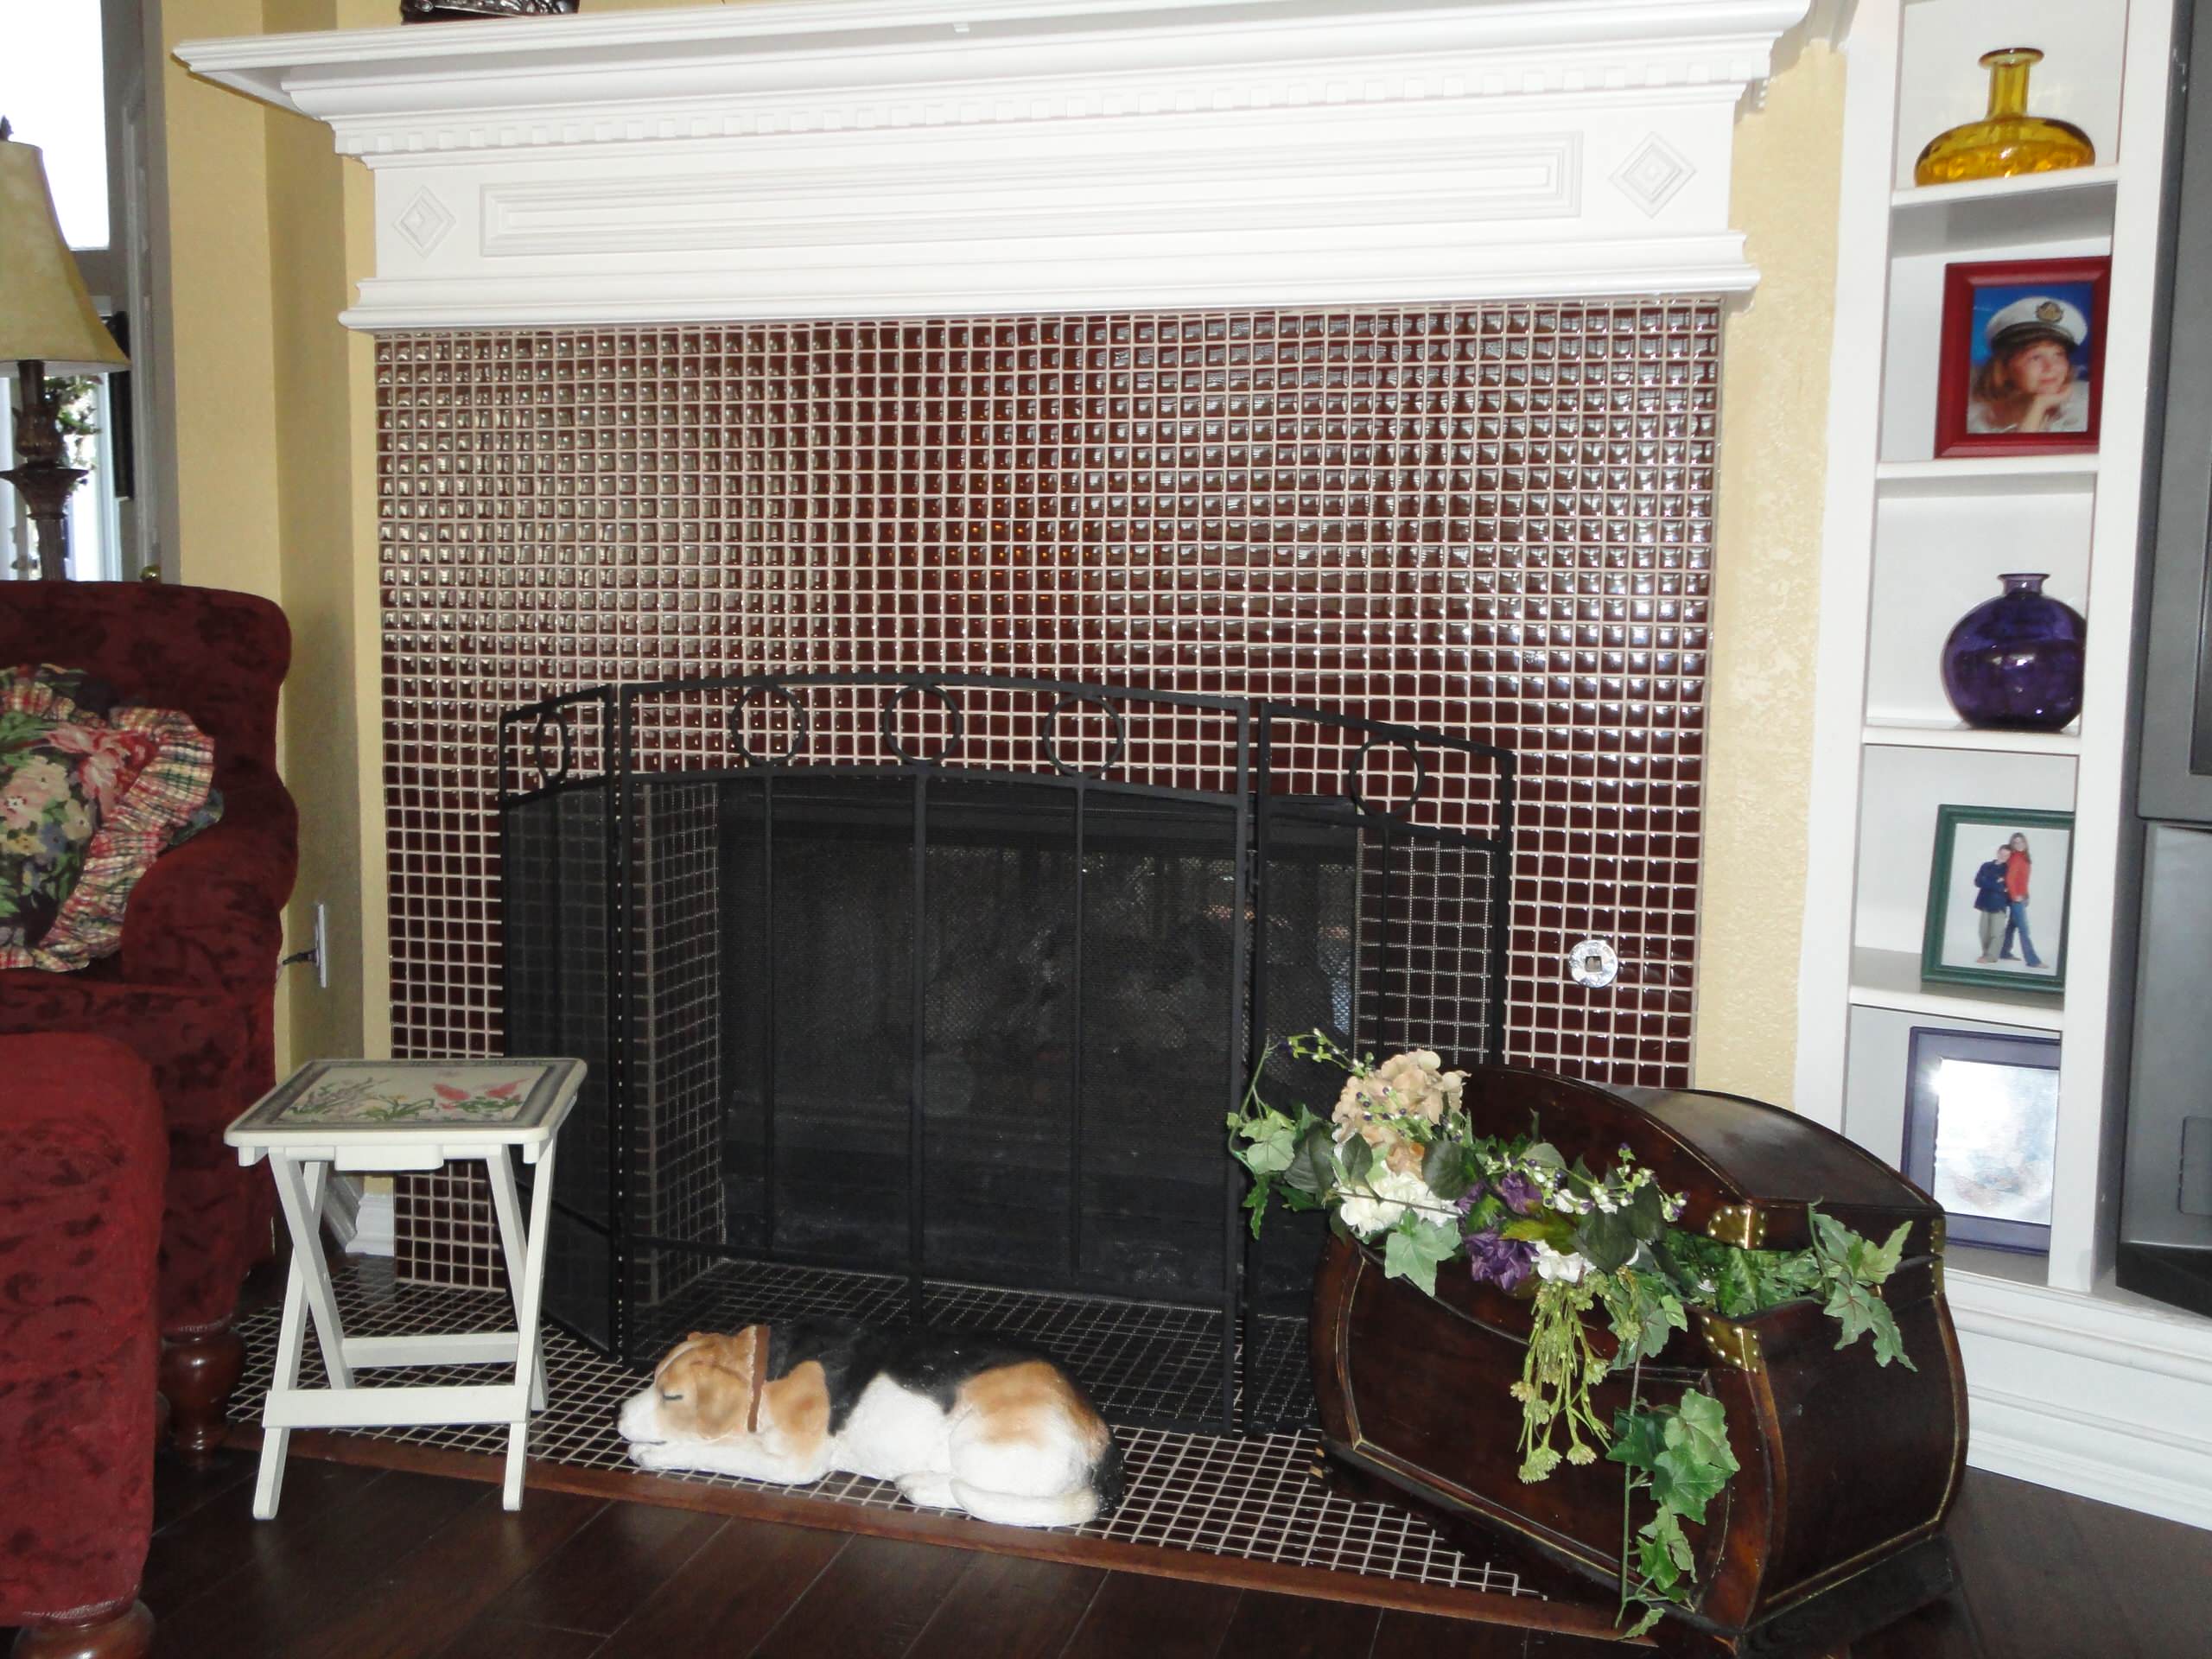 Fireplaces and Mantles